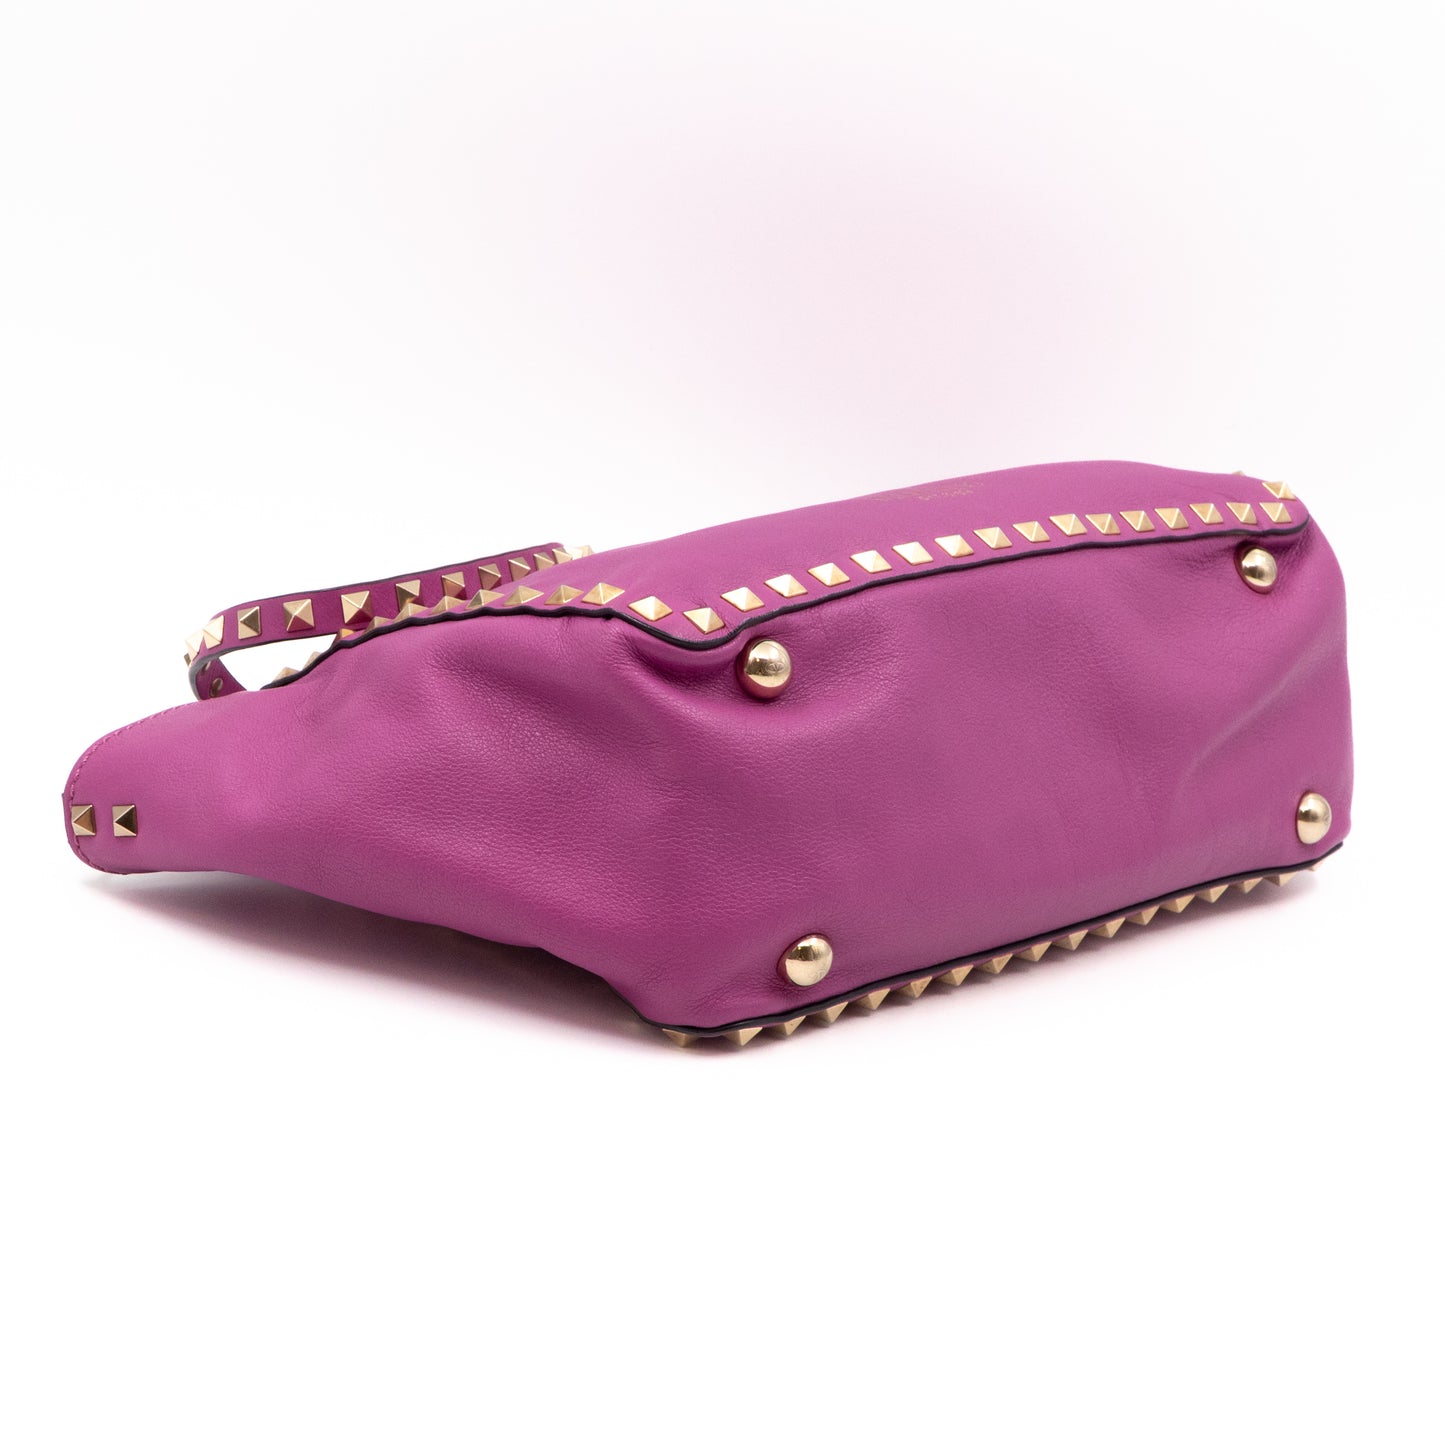 Rockstud Trapeze Tote Pink Leather